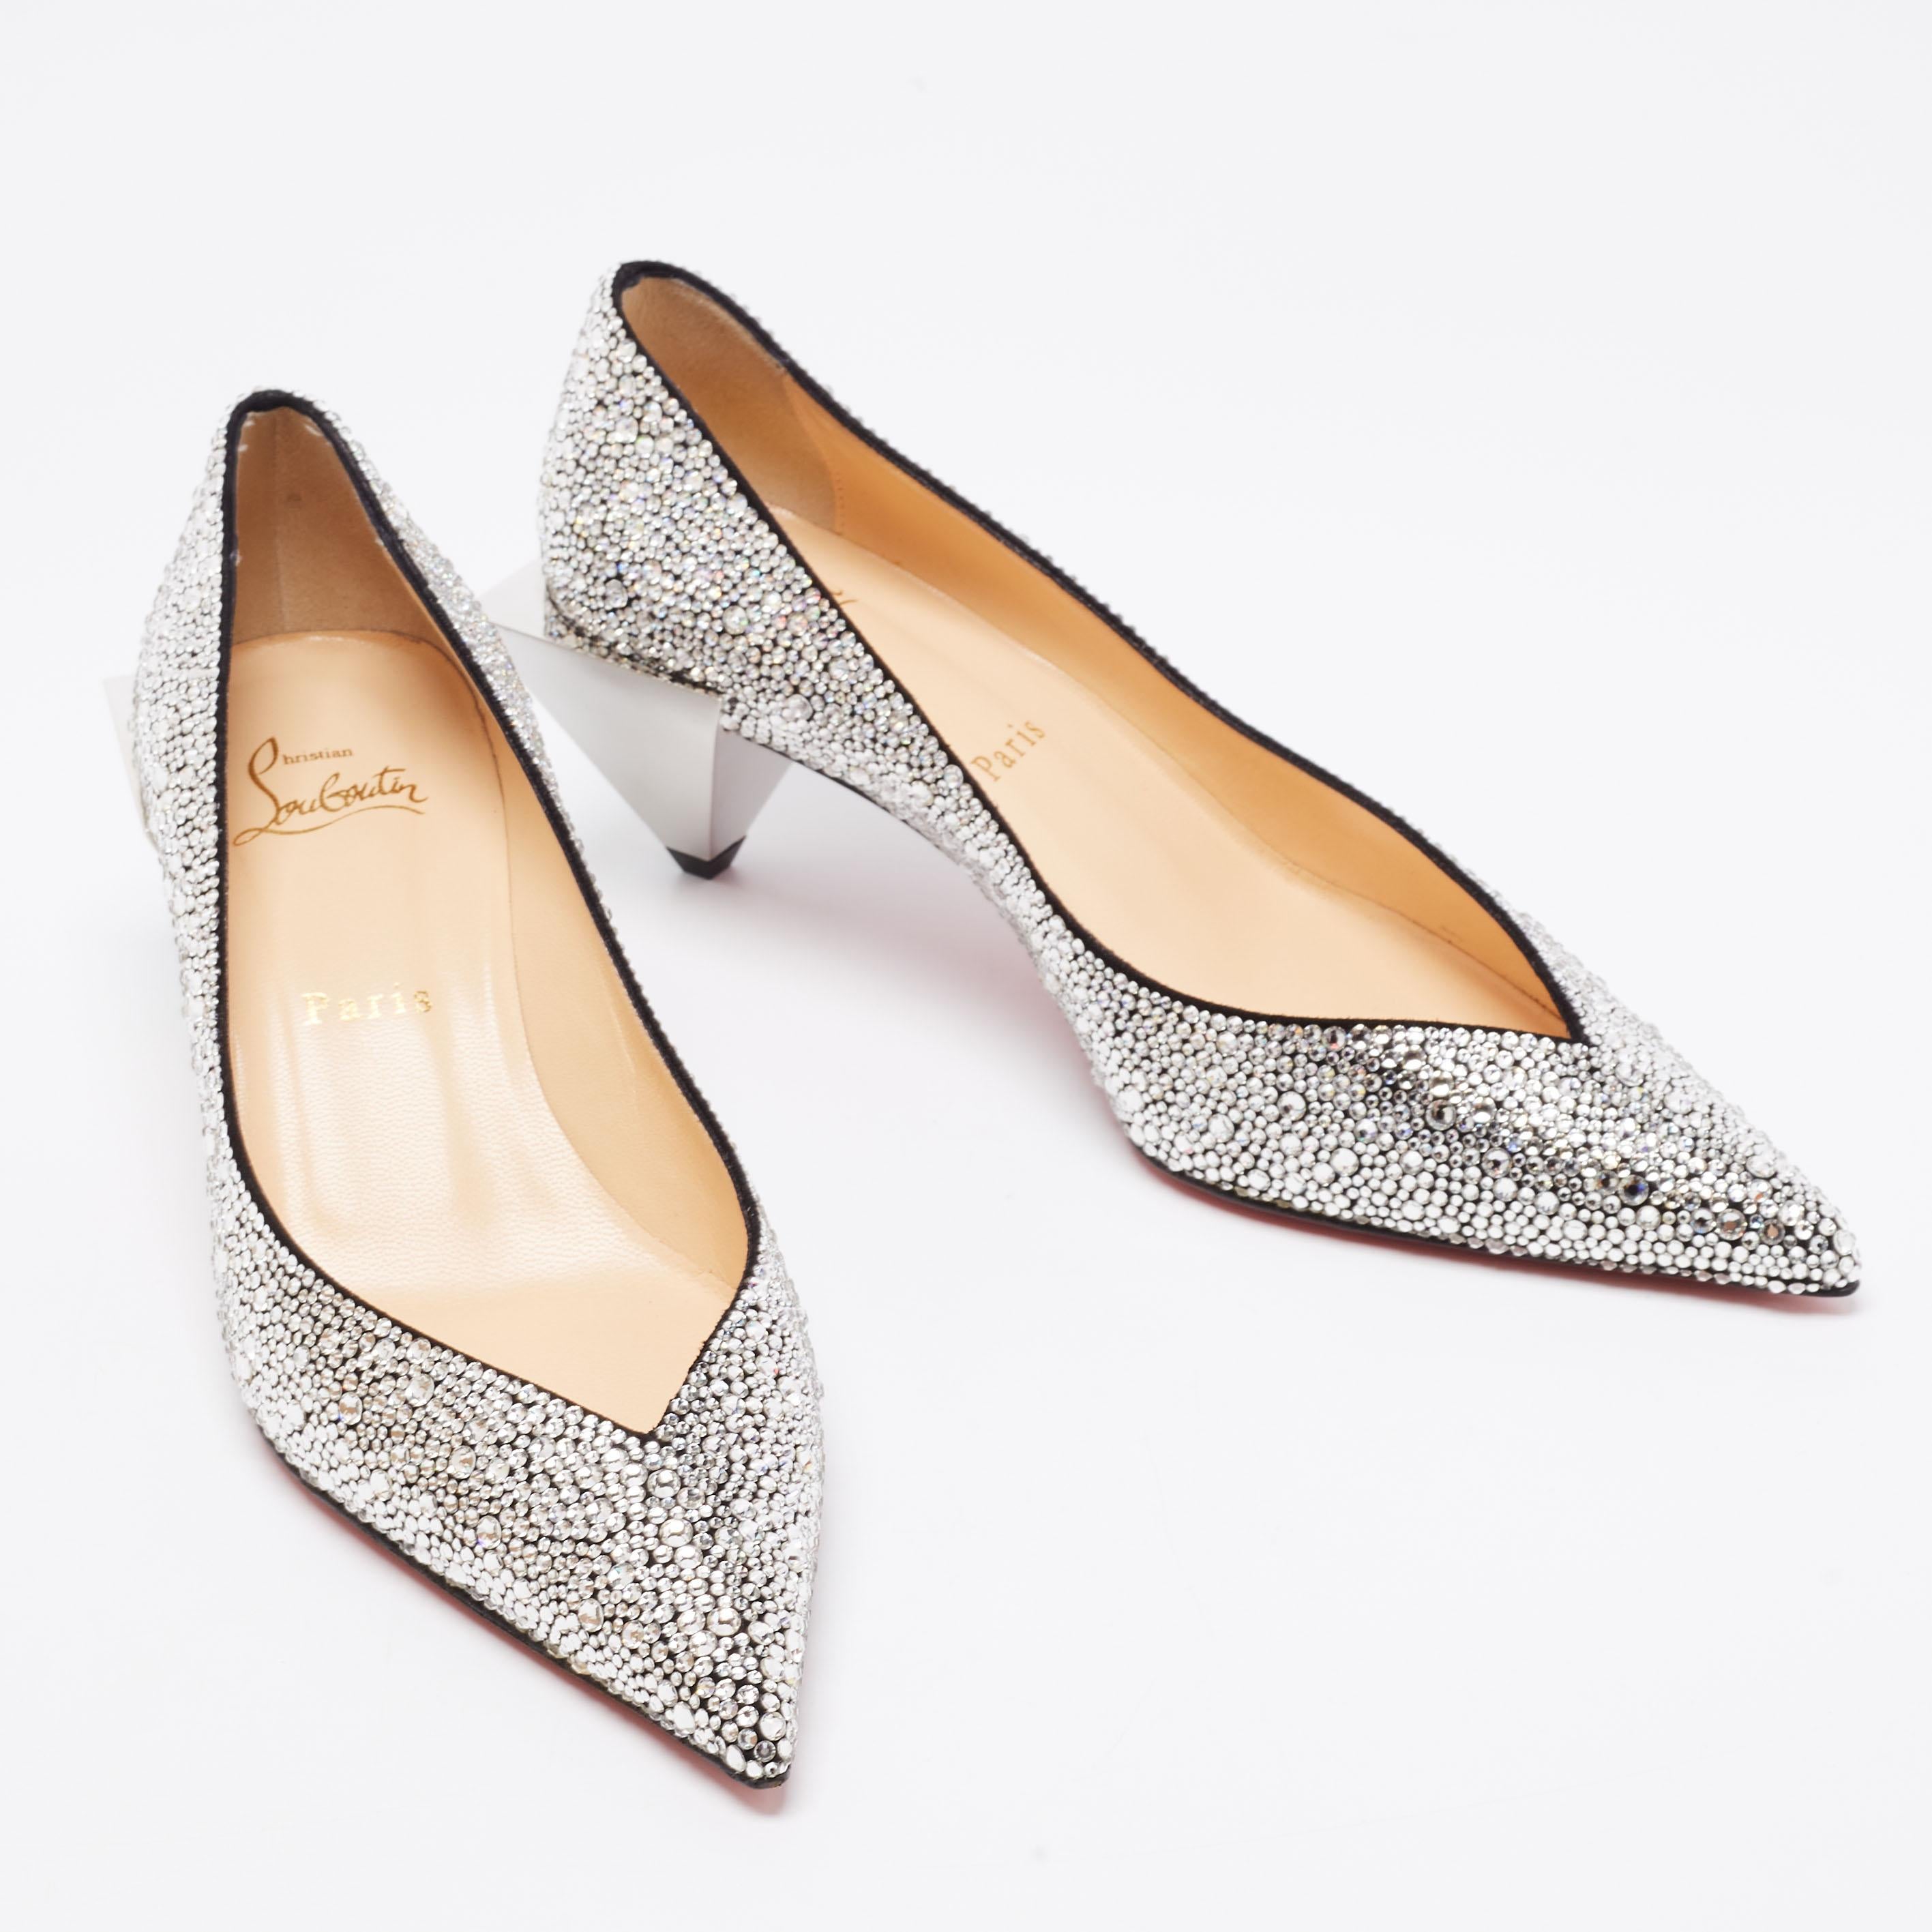 These Christian Louboutin pumps are a great choice if you’re looking to add a pair that's glamorous and comfortable. The pair has been made in Italy from embellished suede and set on 7 cm heels.

Includes Original Box